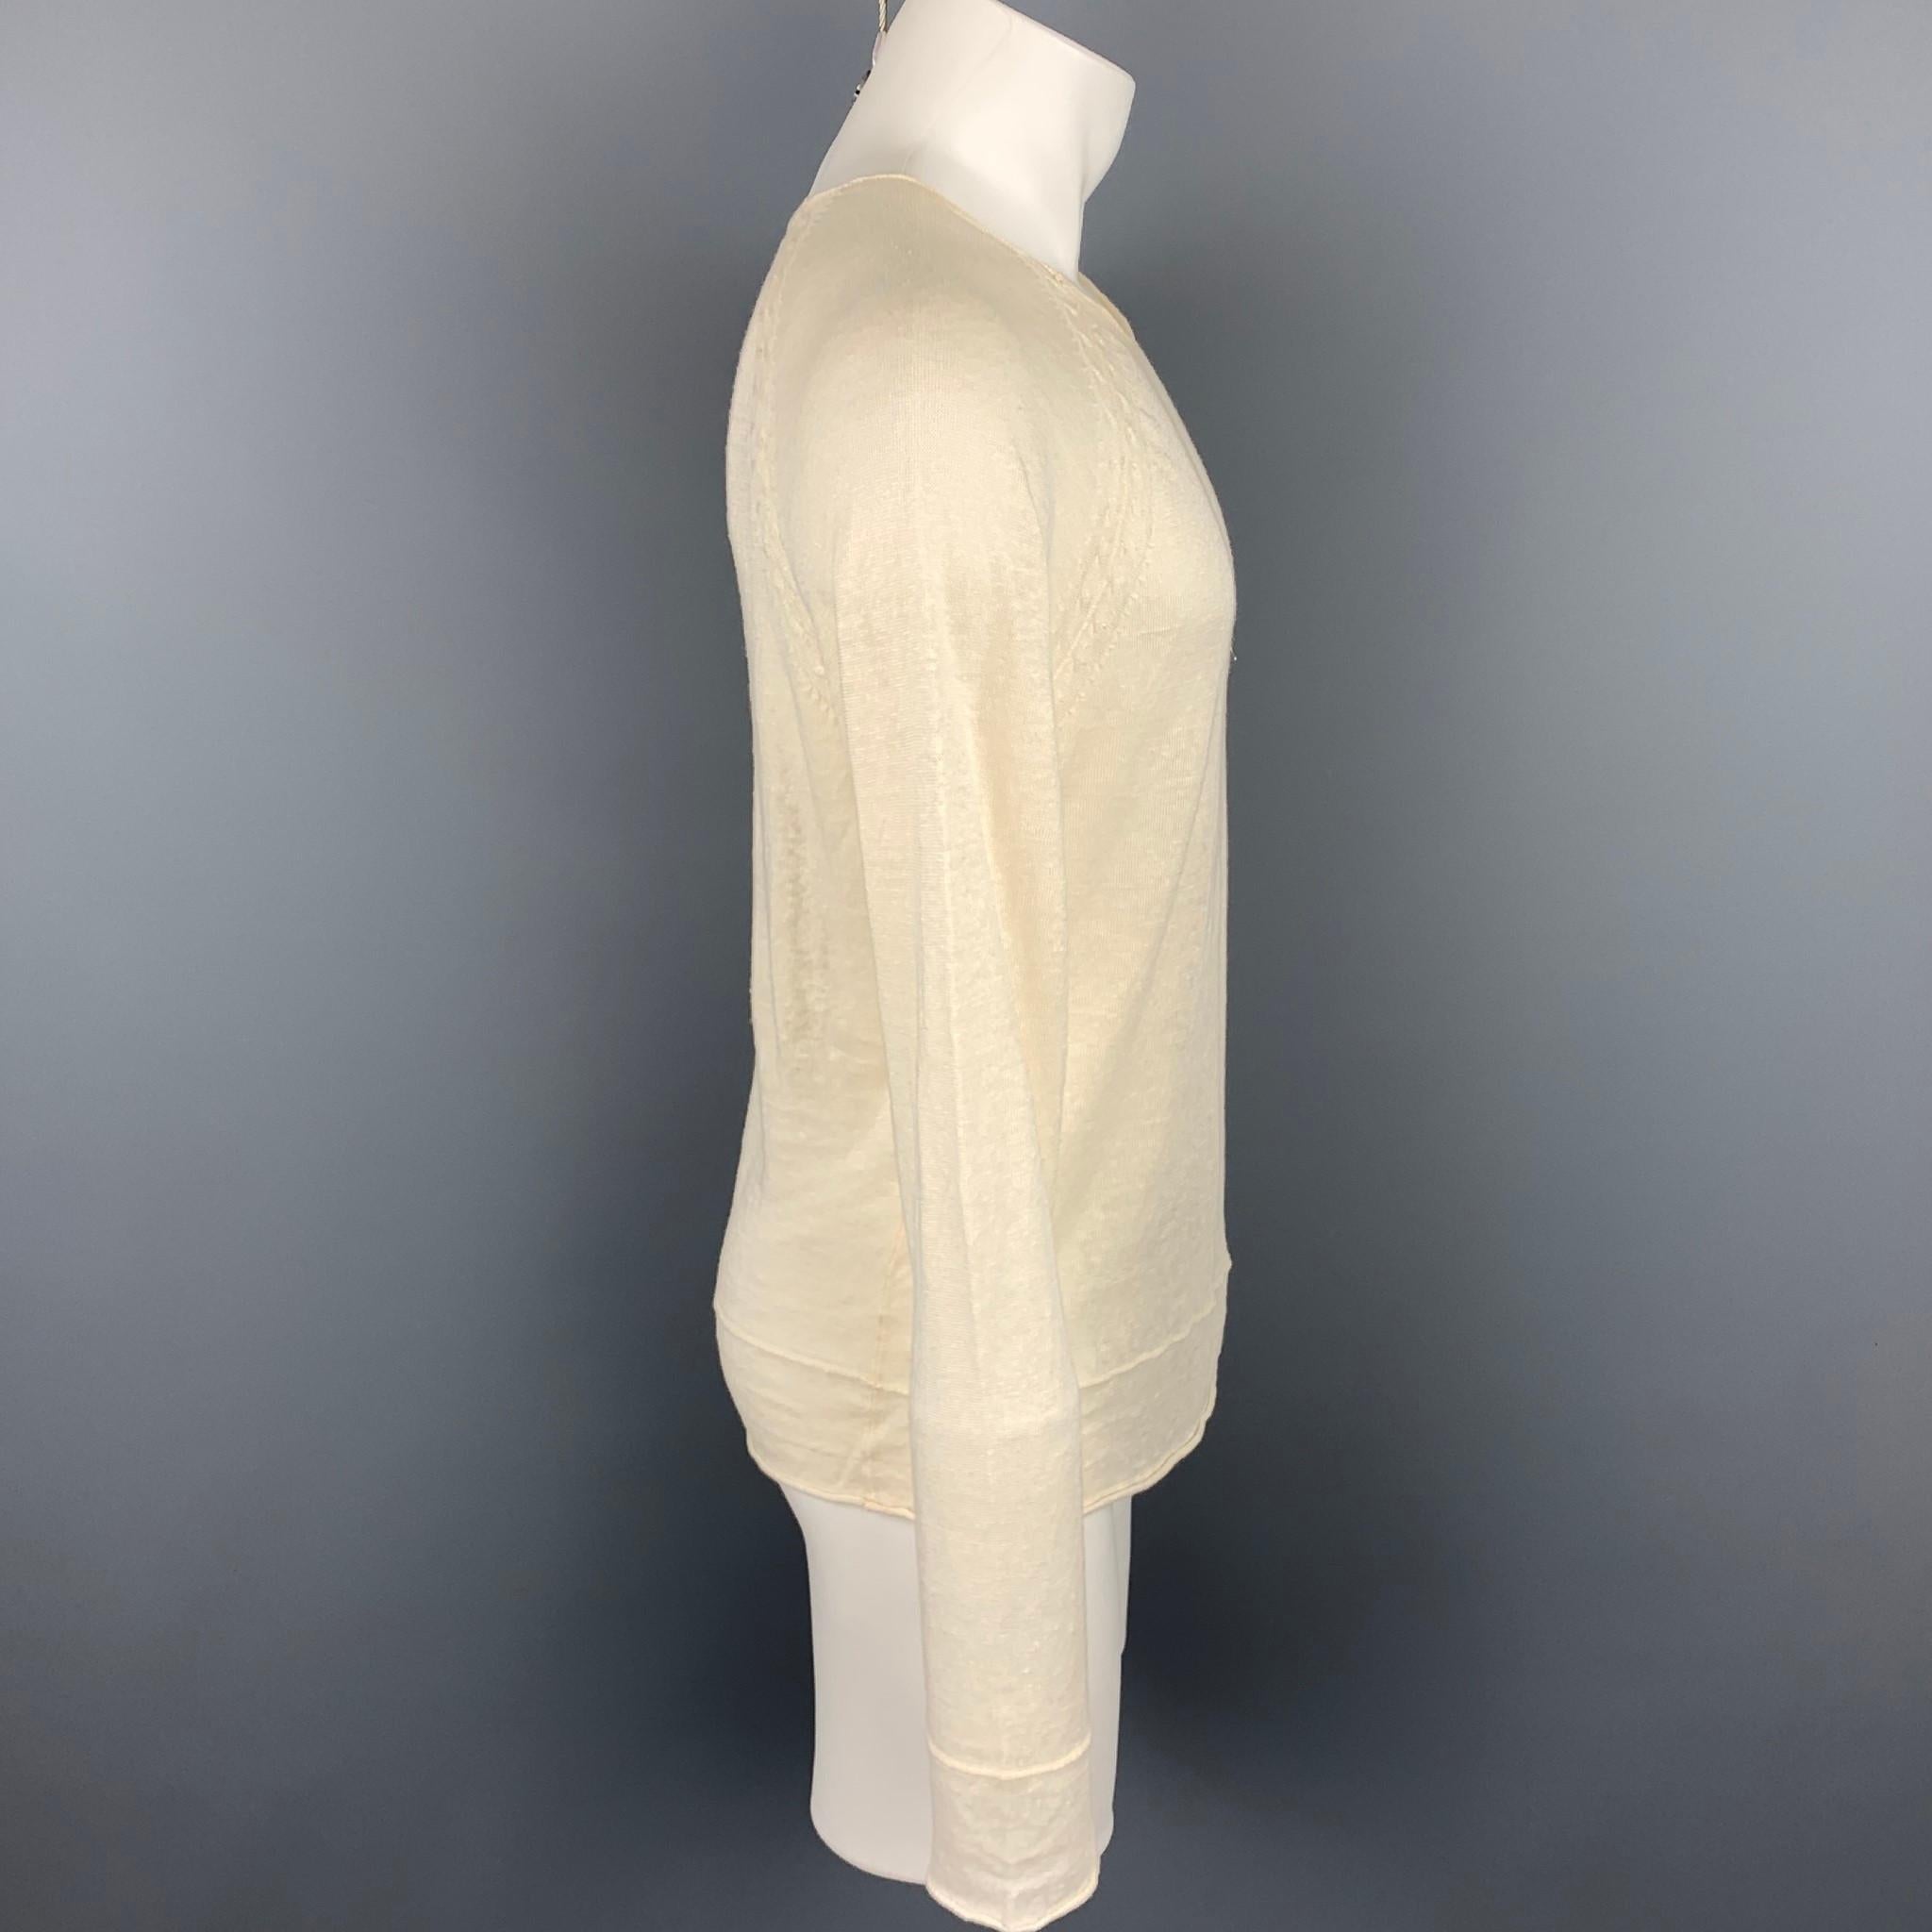 KENZO pullover comes in a beige knitted linen featuring a scoop neck. Moderate wear.

Good Pre-Owned Condition.
Marked: S

Measurements:

Shoulder: 7 in.
Chest: 36 in.
Sleeve: 30 in.
Length: 25 in. 